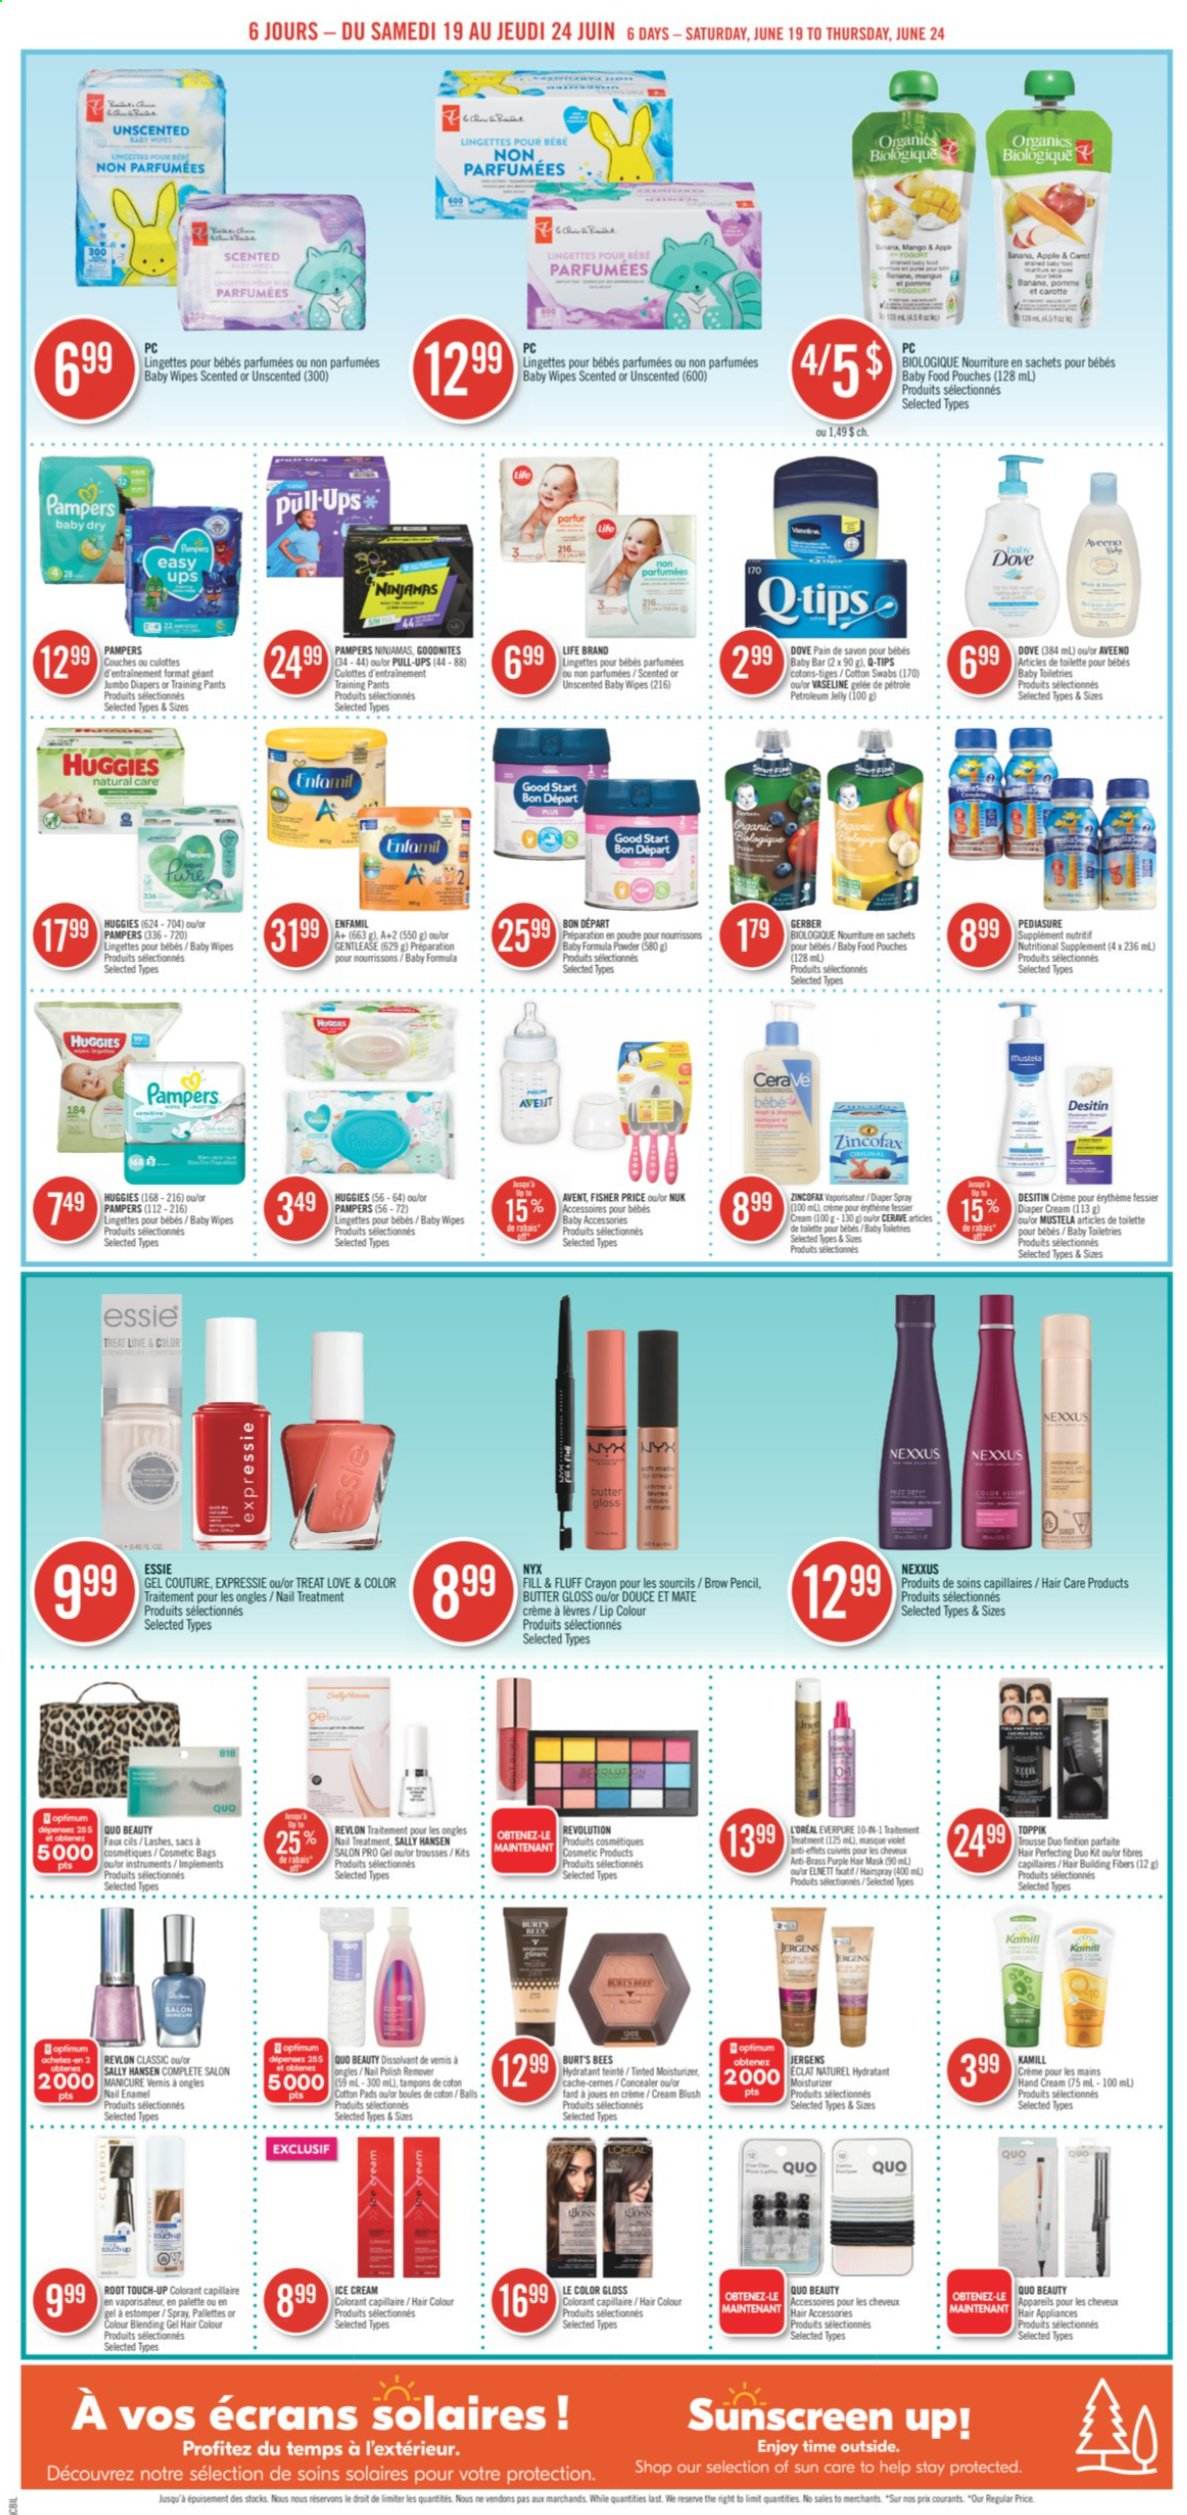 thumbnail - Pharmaprix Flyer - June 19, 2021 - June 24, 2021 - Sales products - Apple, butter, ice cream, Gerber, Enfamil, wipes, pants, baby wipes, nappies, Nuk, baby pants, Aveeno, petroleum jelly, Vaseline, tampons, CeraVe, L’Oréal, moisturizer, NYX Cosmetics, Root Touch-Up, Revlon, hair color, Nexxus, Toppik, hand cream, Jergens, Eclat, cosmetic bag, manicure, nail enamel, nail polish remover, corrector, pencil, nutritional supplement, Desitin, Sally Hansen, Huggies, Palette, Pampers. Page 4.